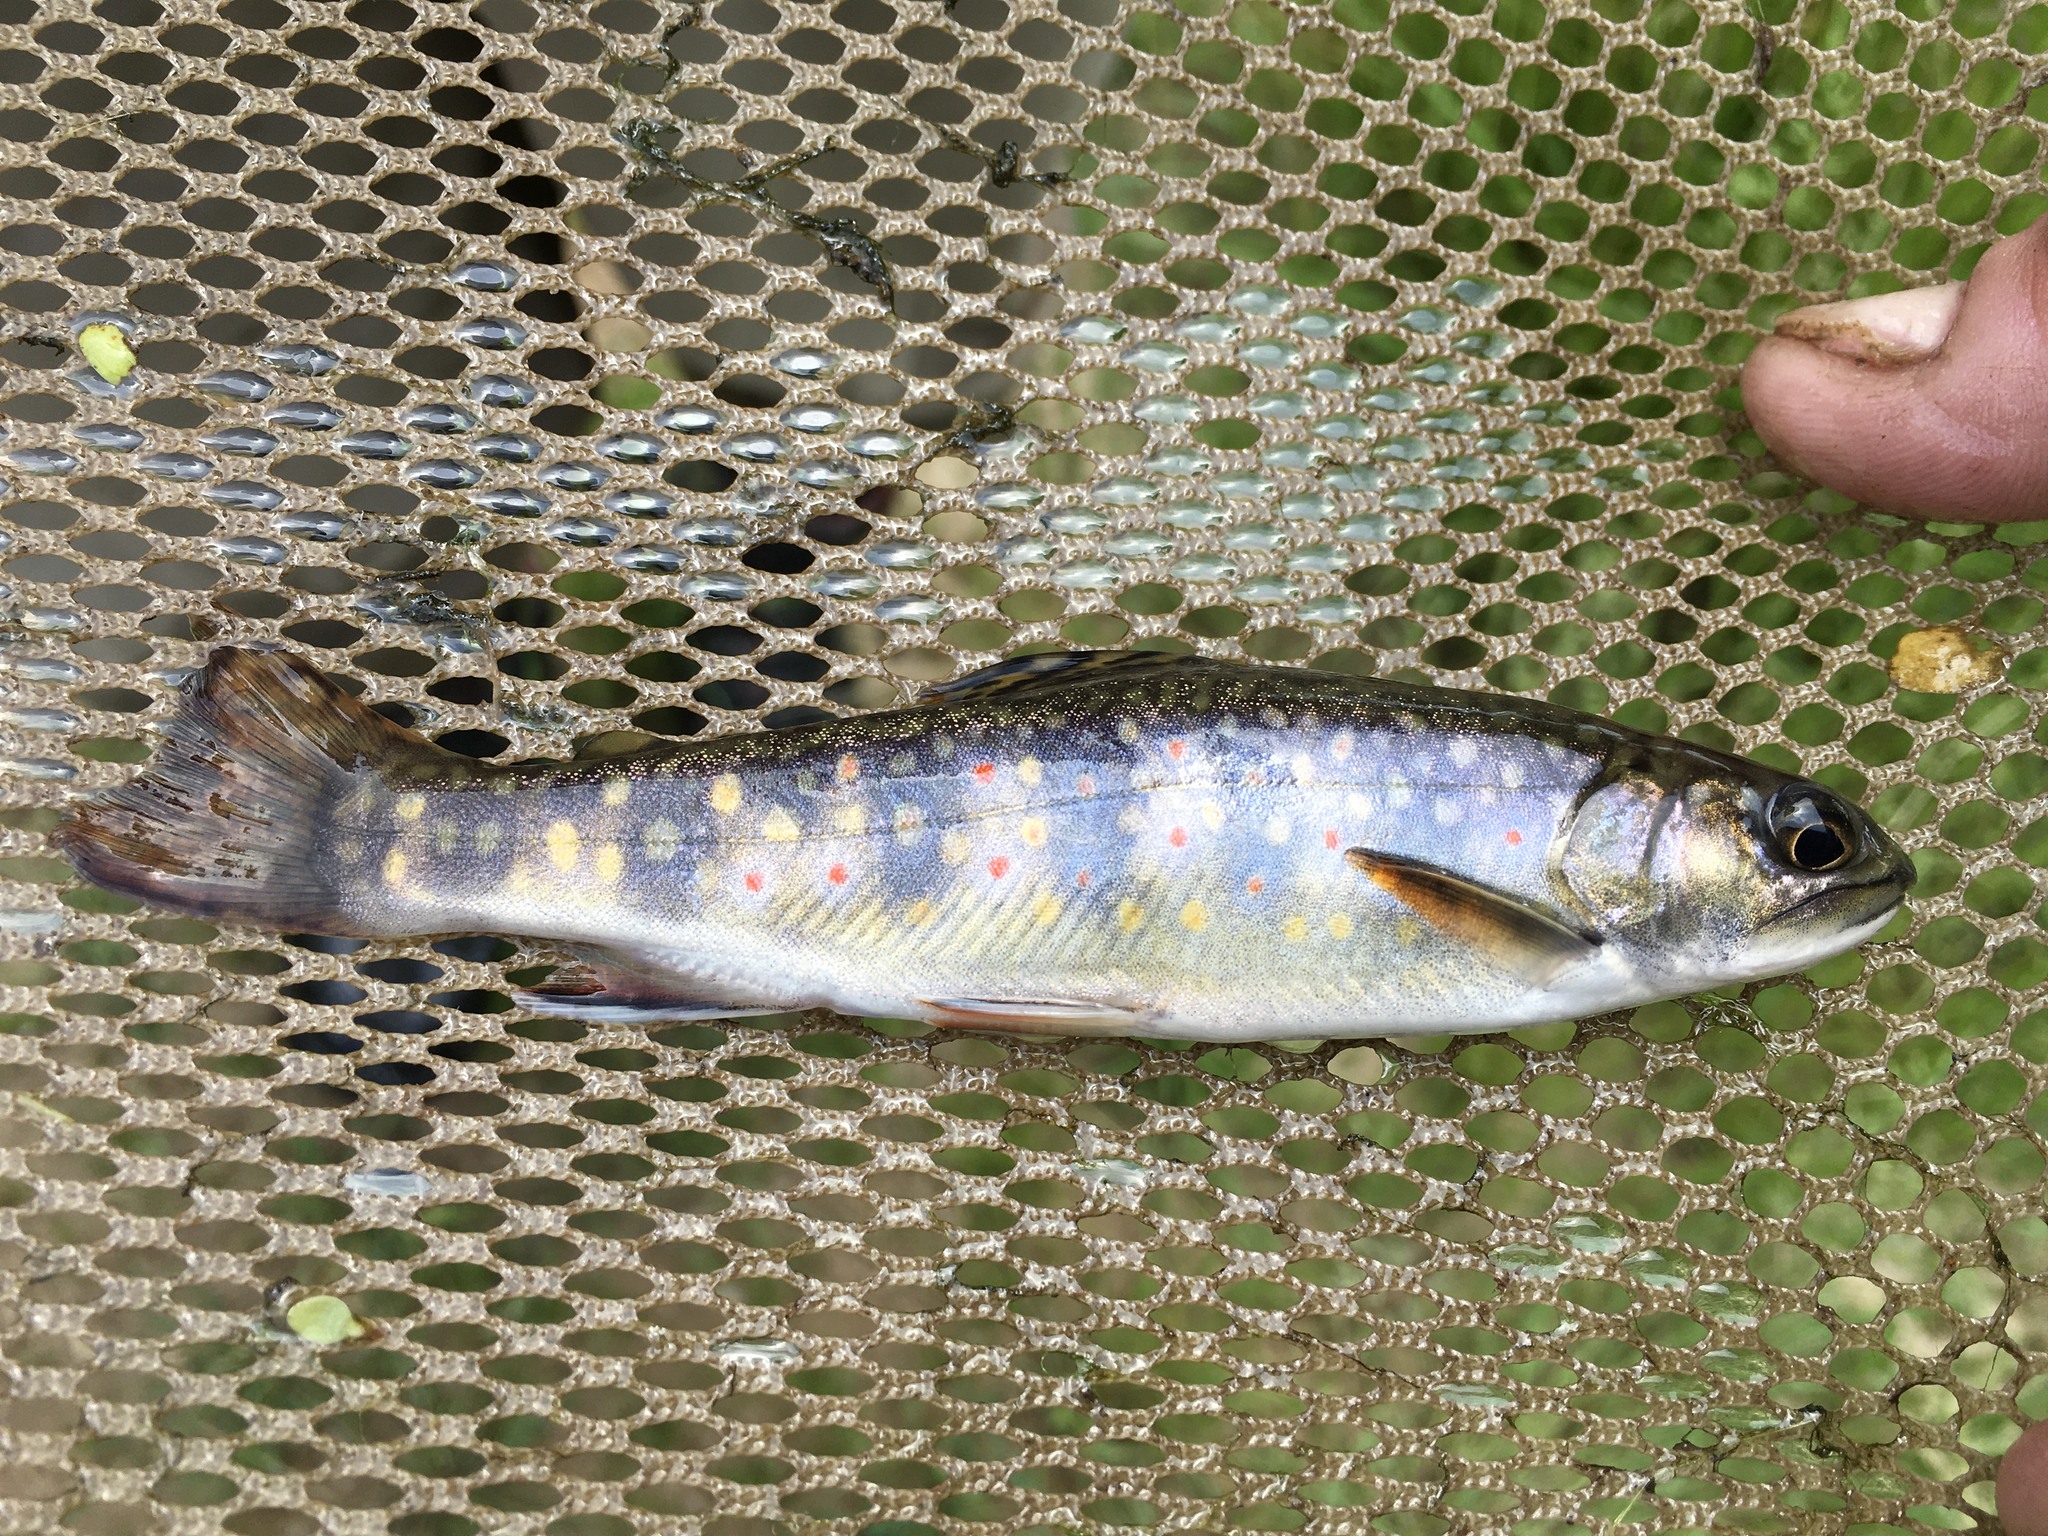 A small brown, yellow, and red speckled fish lays flay in a net.